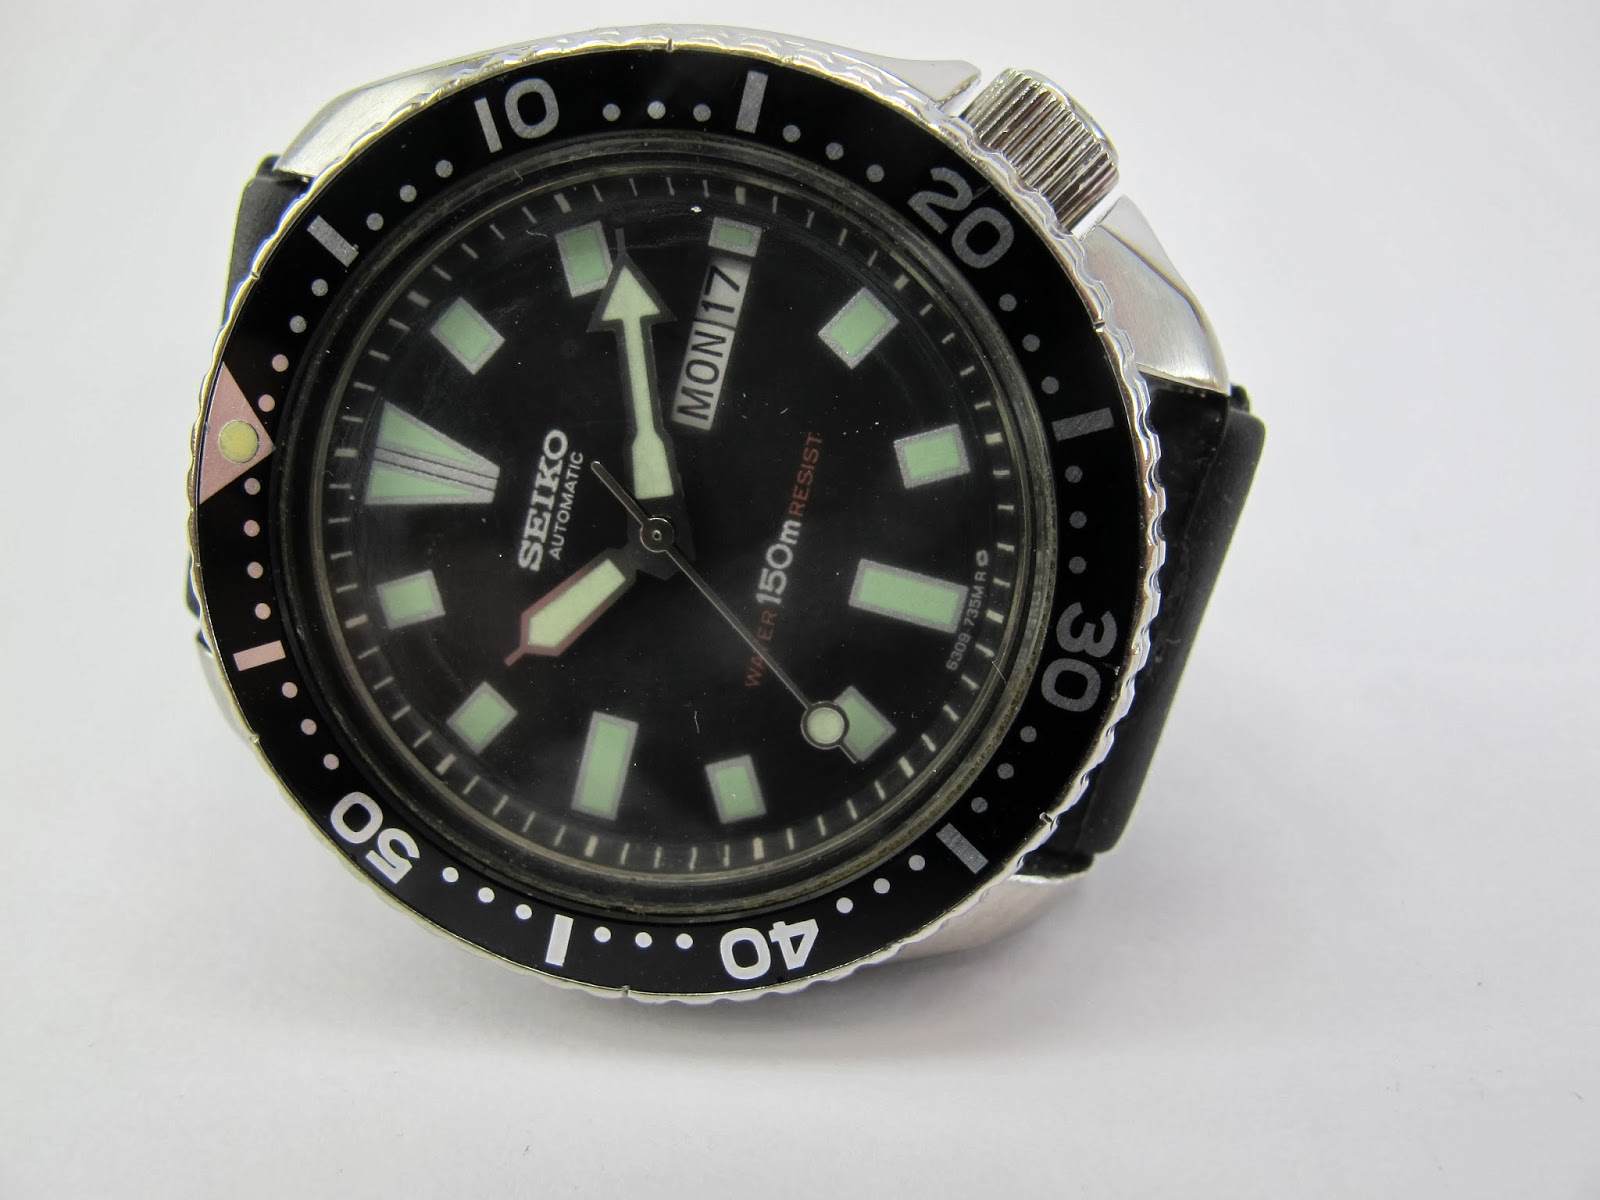 Seiko 6309-7290 diver again and forever.... - watchopenia